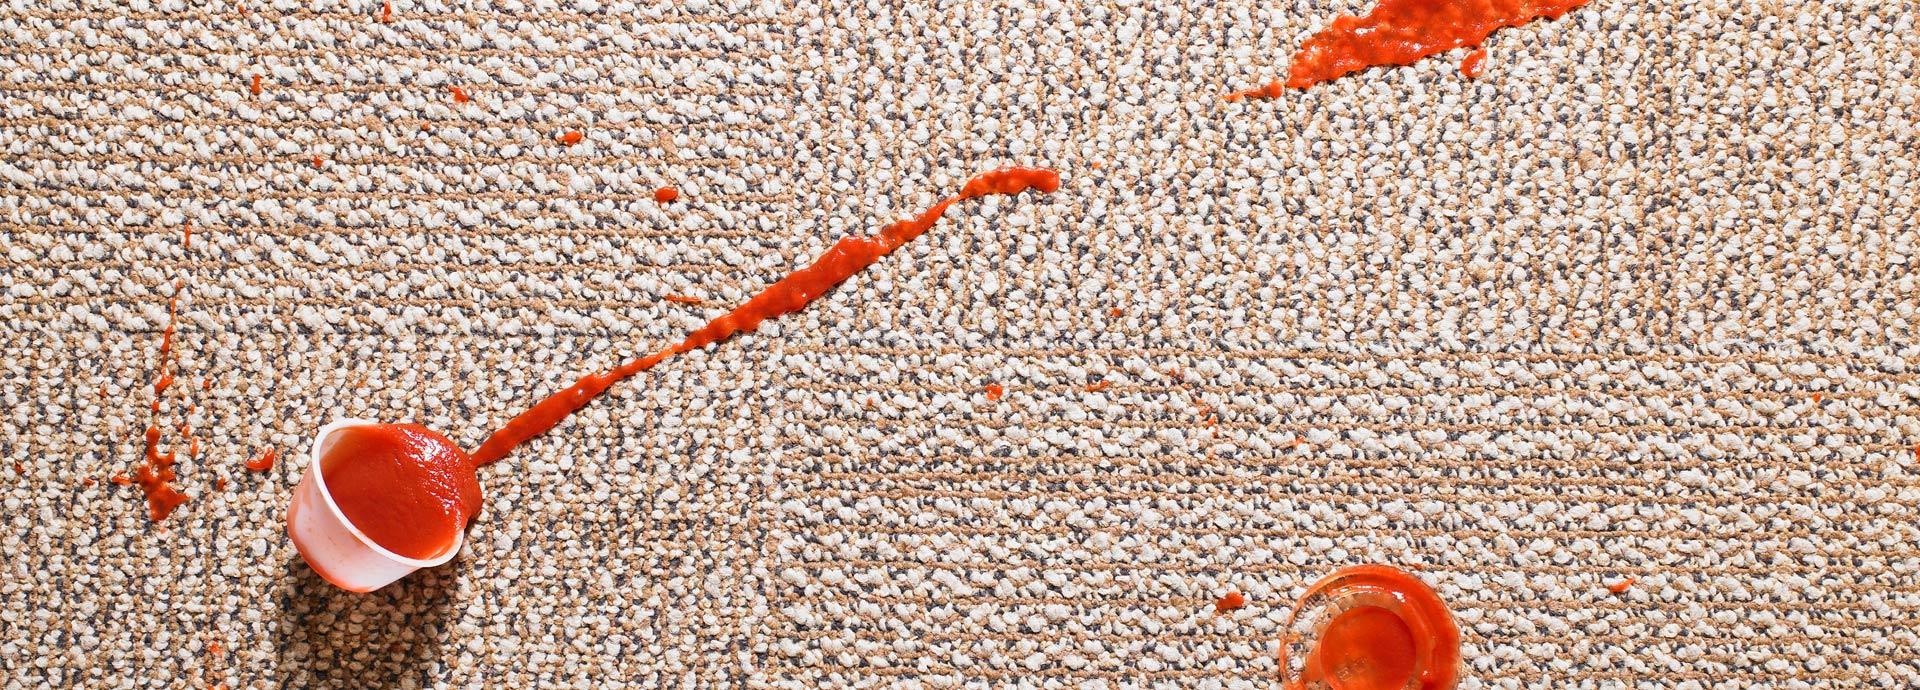 Carpet Cleaning In Houston Texas 4